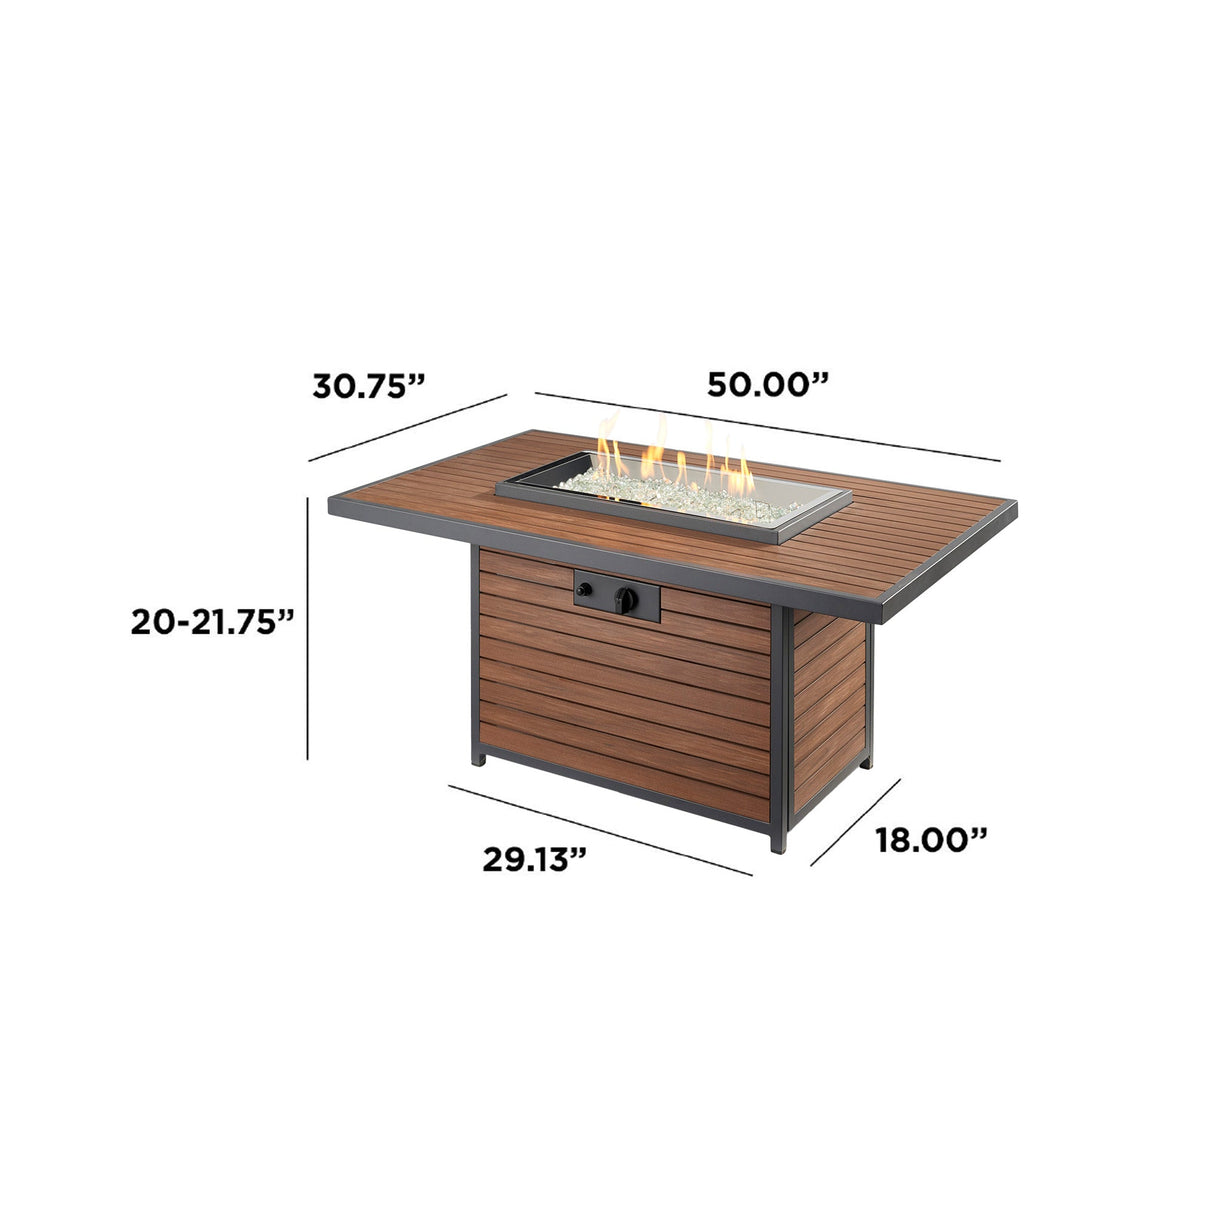 Dimensions overlaid on a Kenwood Rectangular Chat Height Gas Fire Pit Table